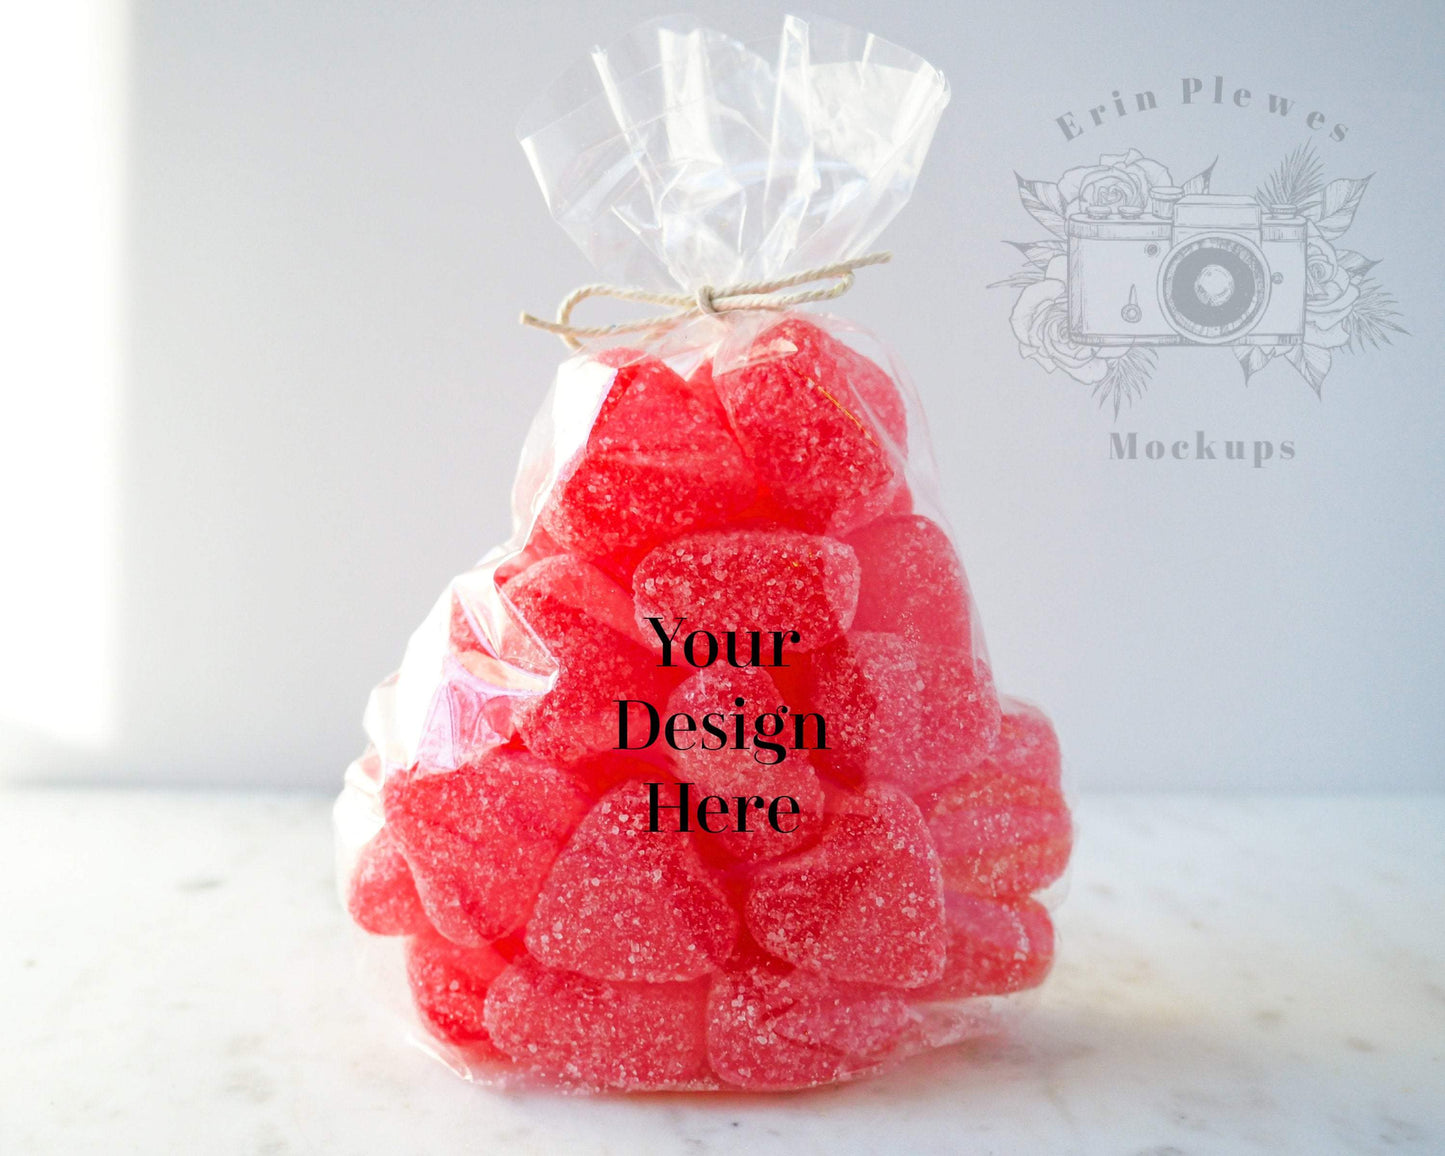 Erin Plewes Mockups Party Favor Mockup, Valentine's Day gift bag mock up to add your design and stock photography, Jpeg Instant Digital Download Template